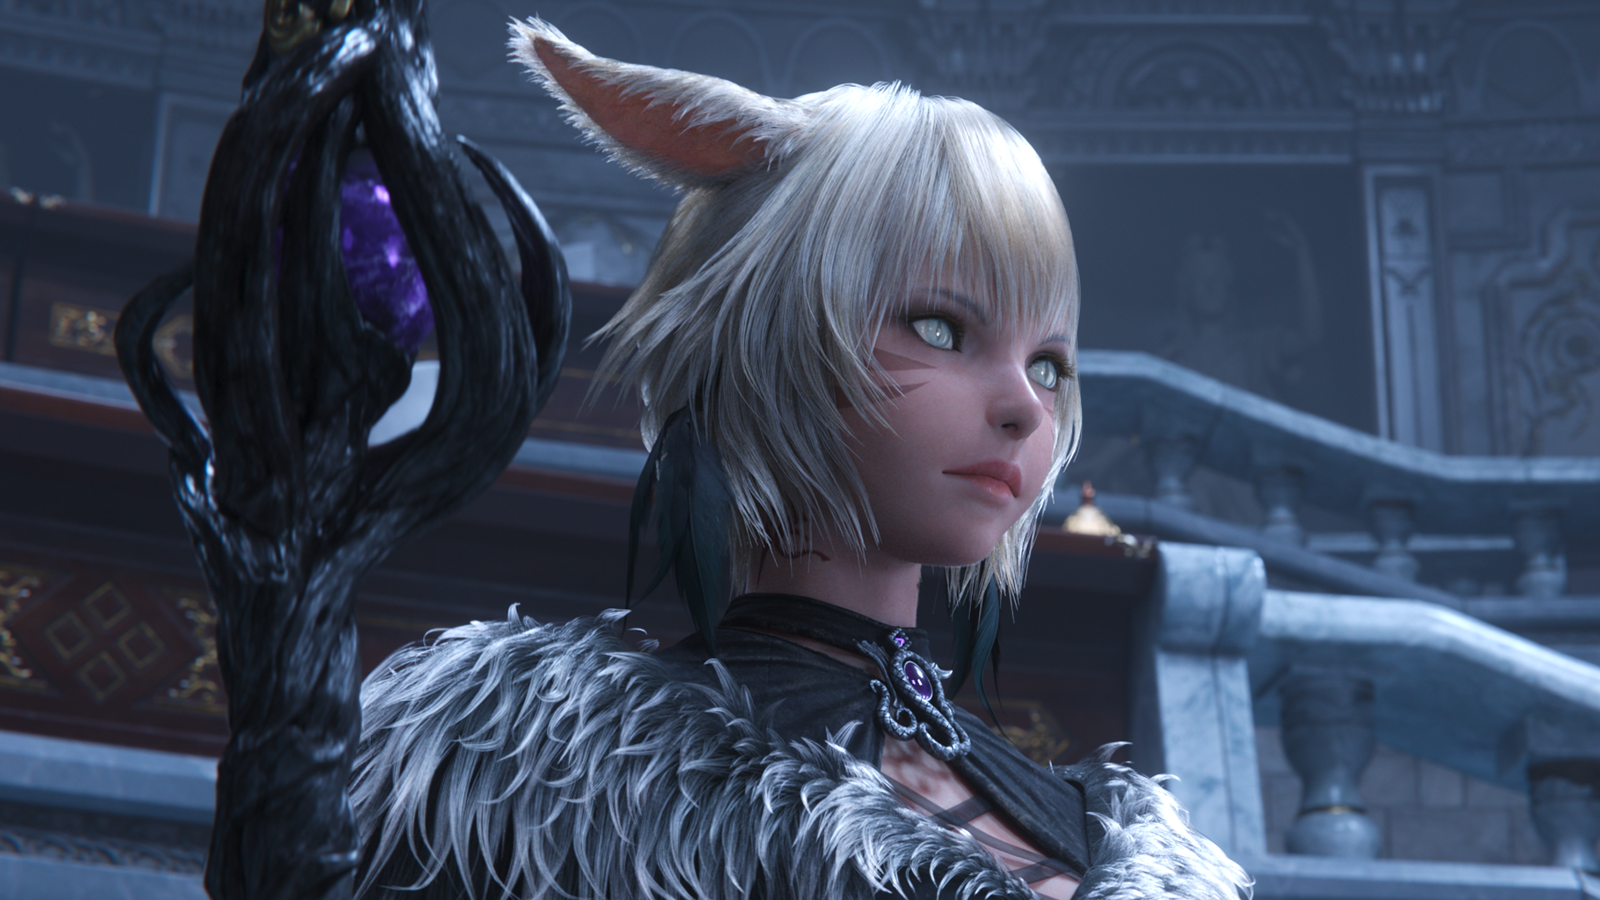 Number of Final Fantasy XIV players is over 30 million